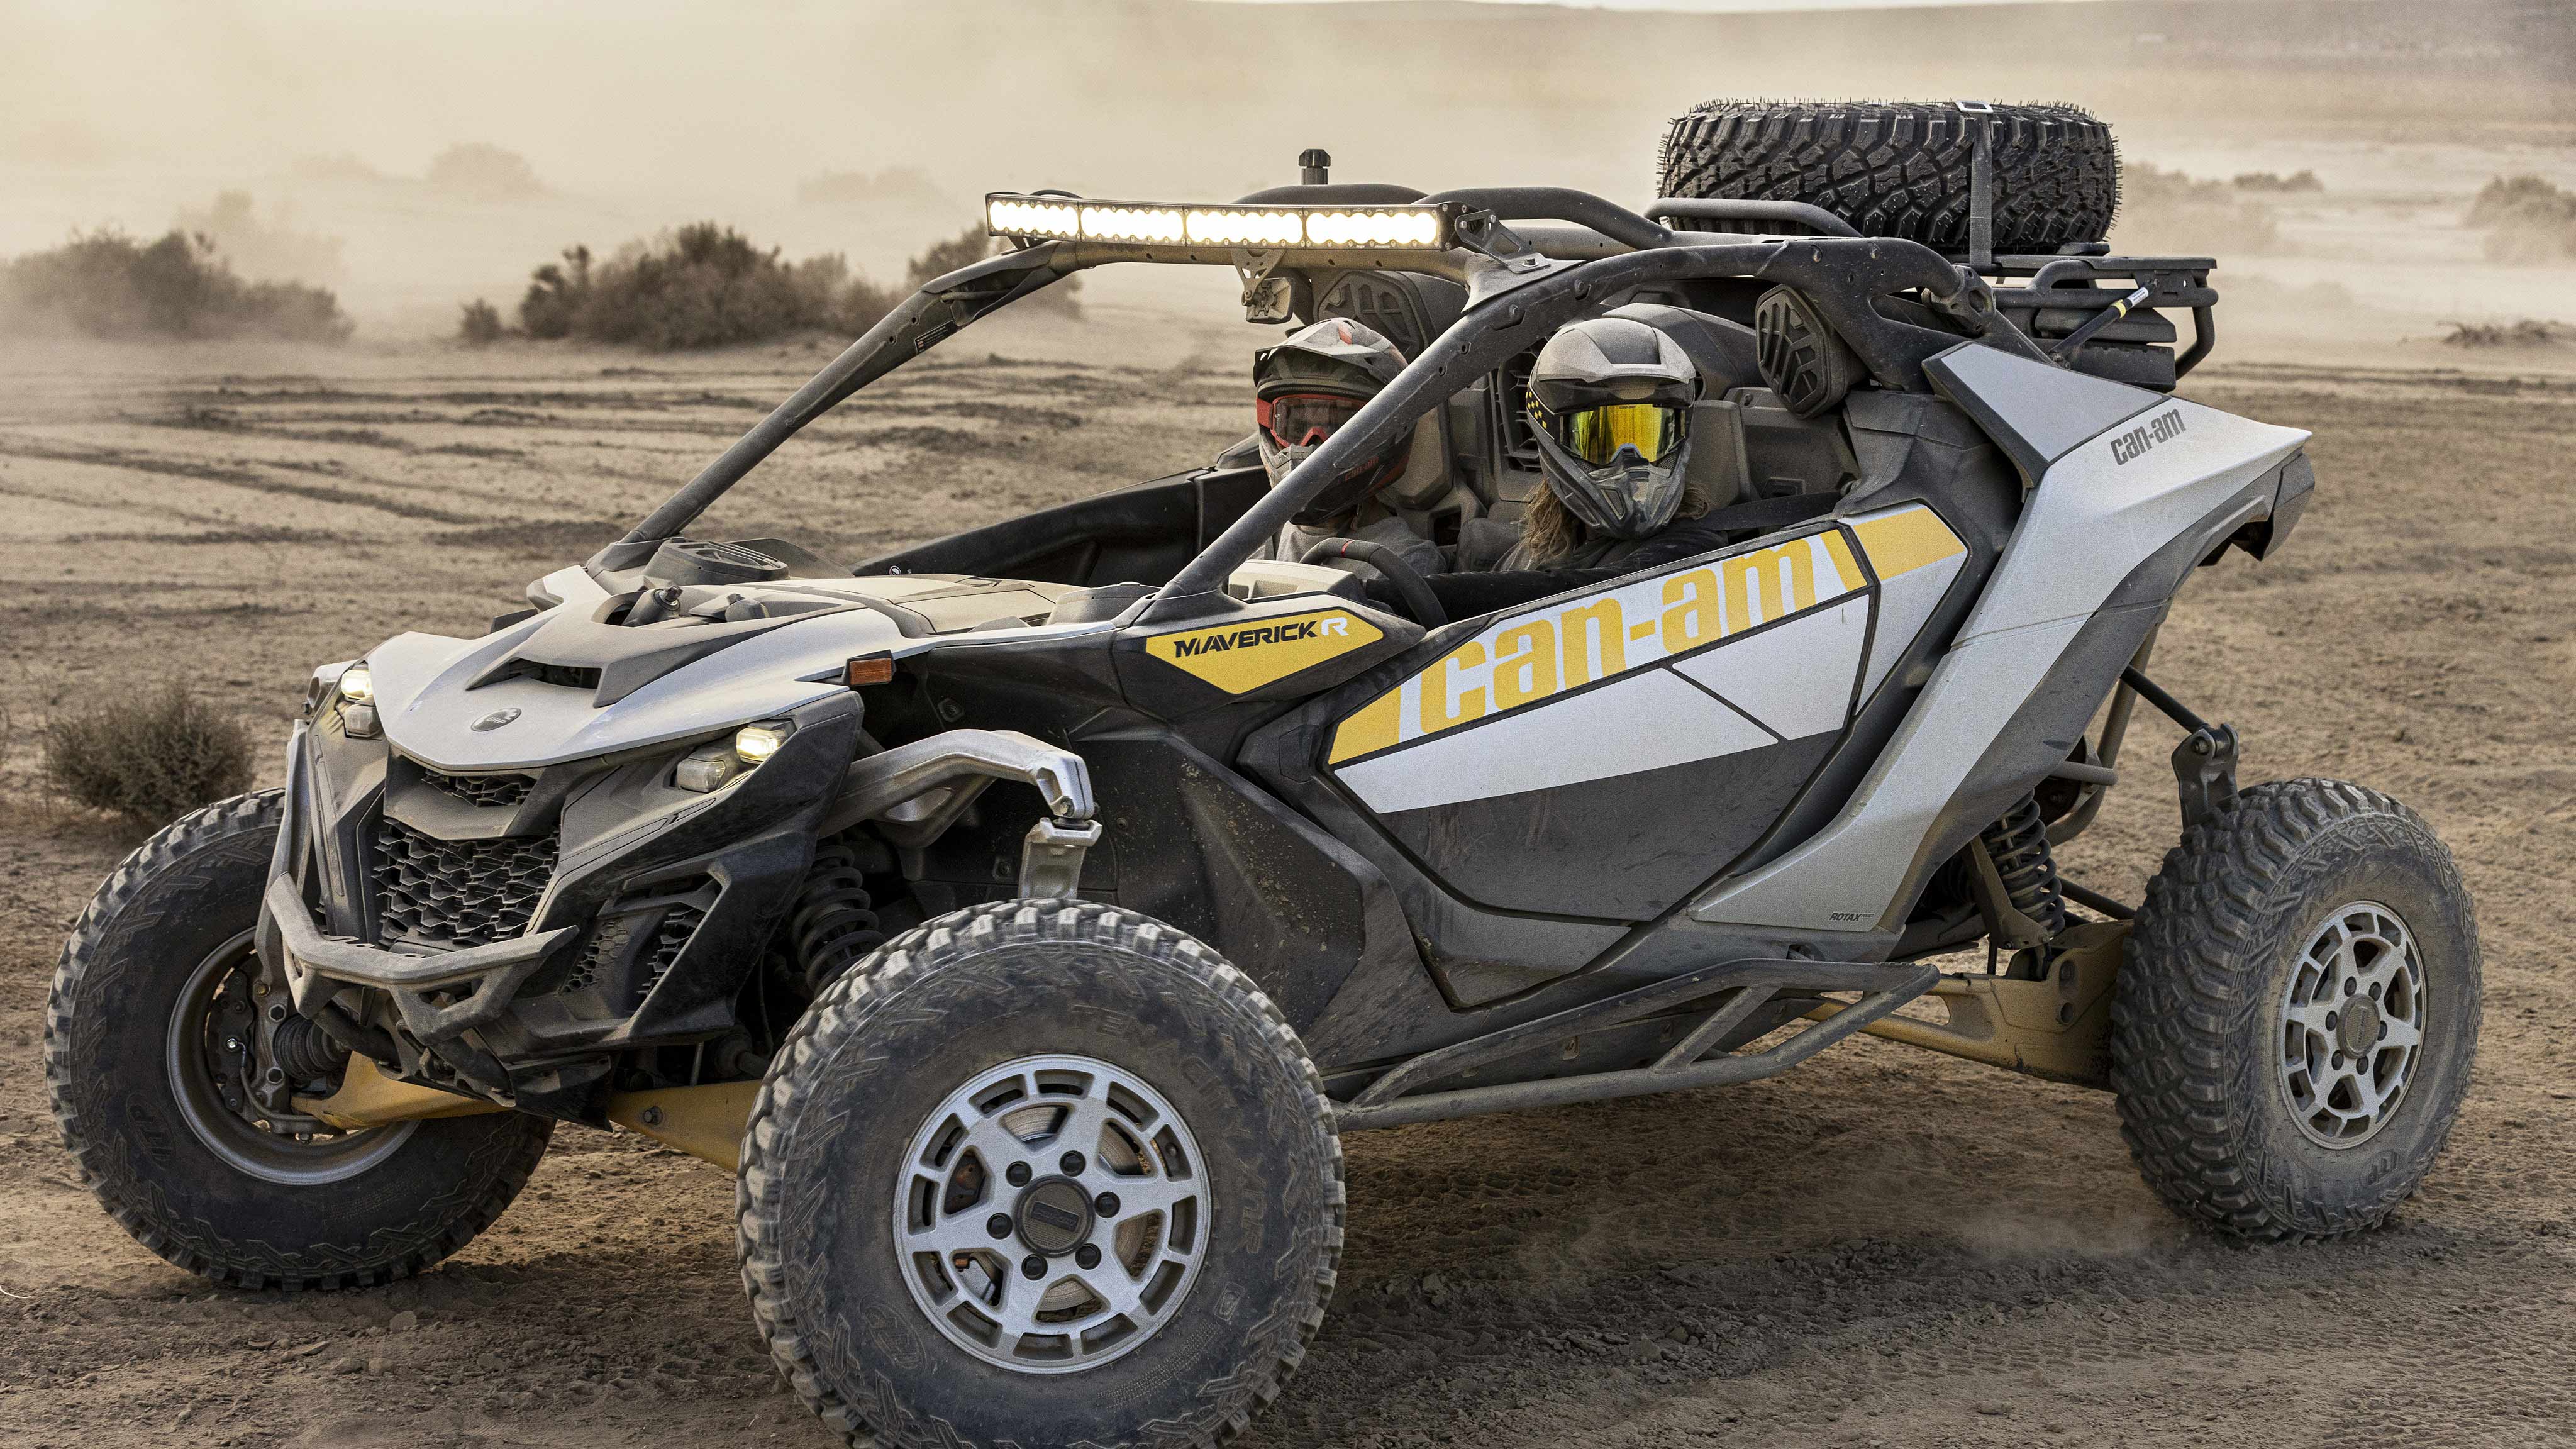 A Can-Am Maverick R out in the desert for a drive